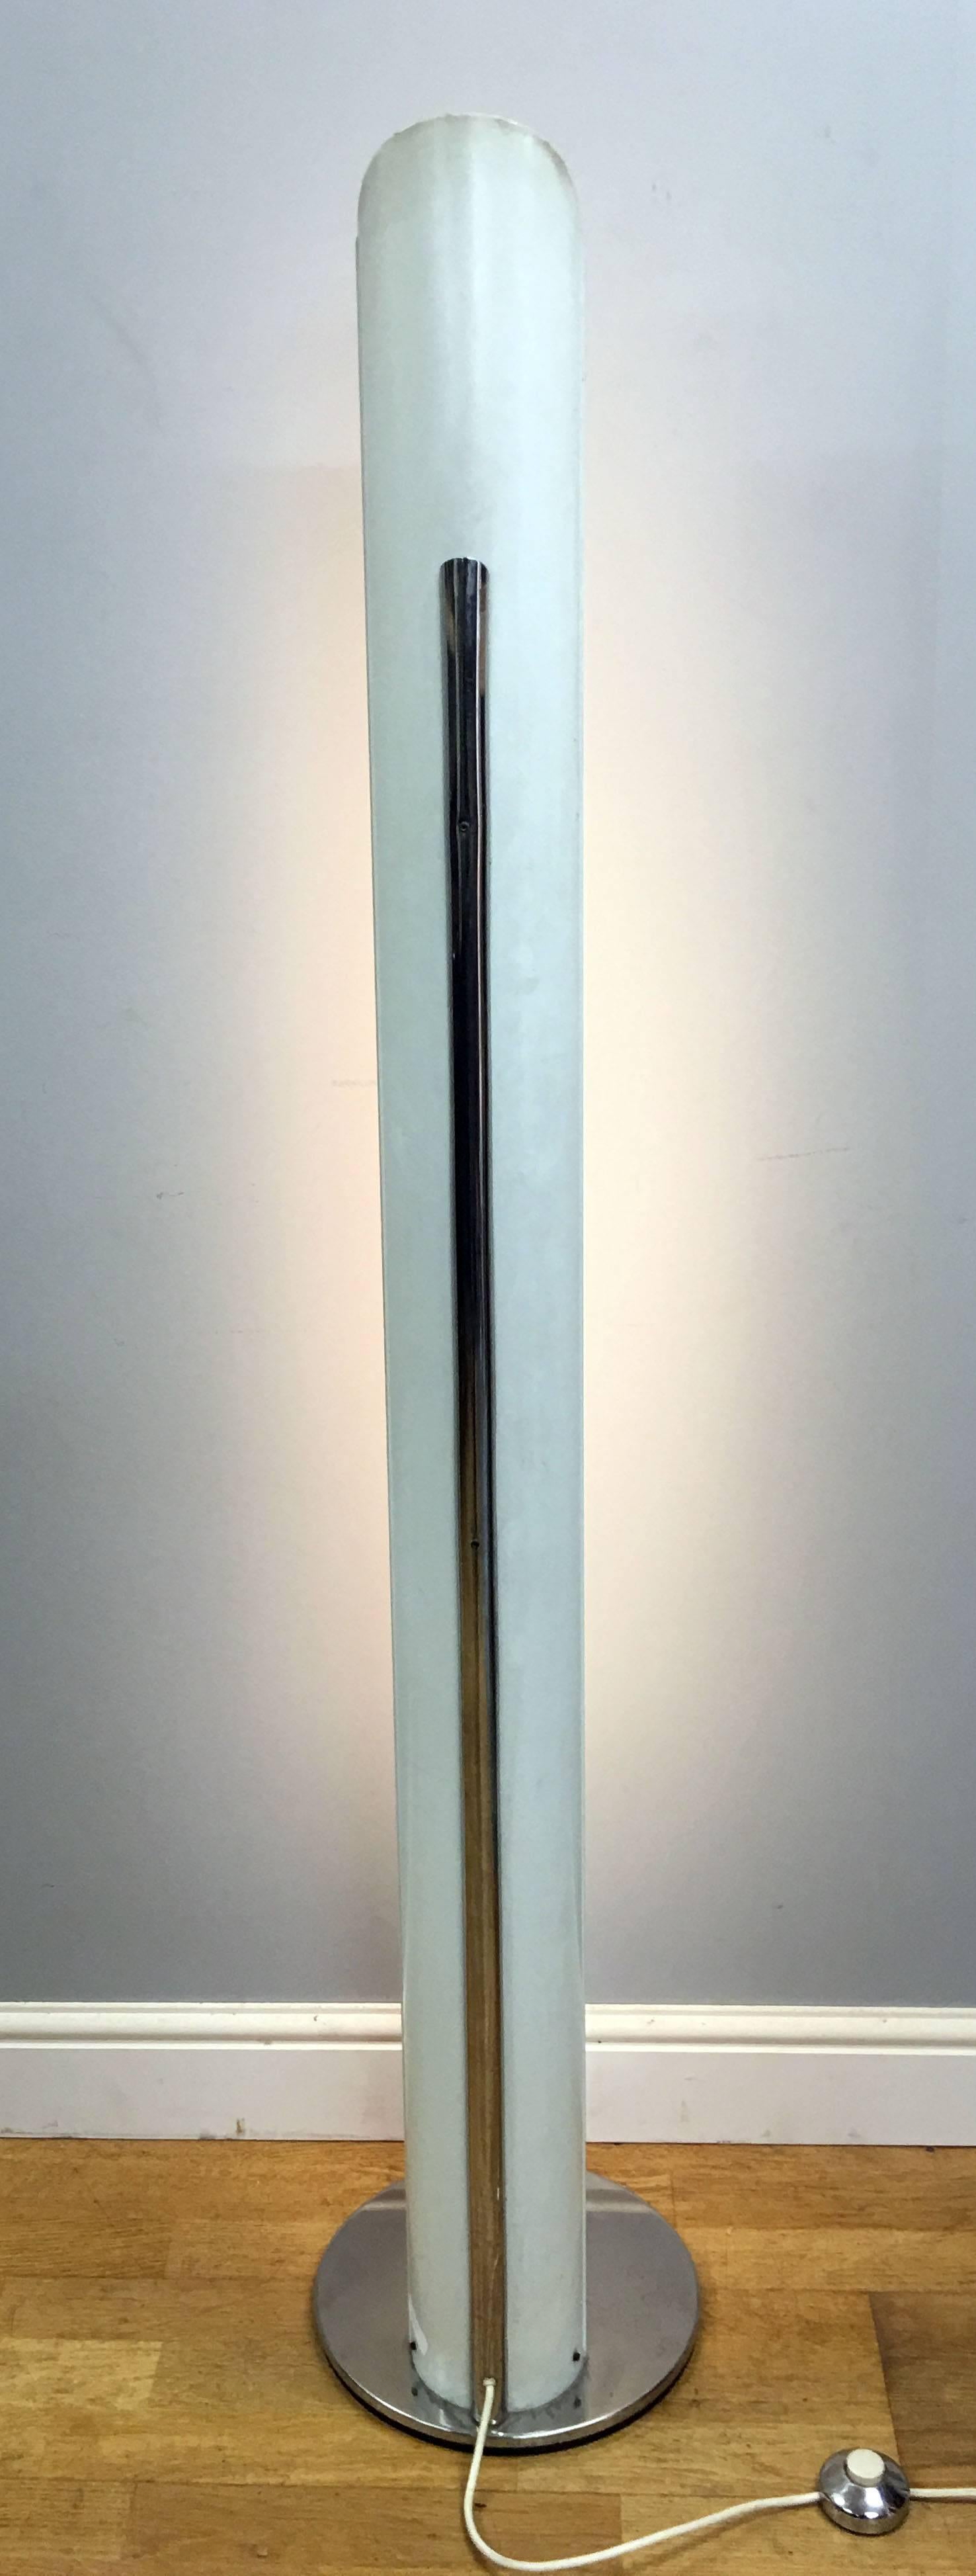 Italian Fantastic 'TOTEM' Floor Lamp by Enrico Tronconi in Chrome and White Metal 